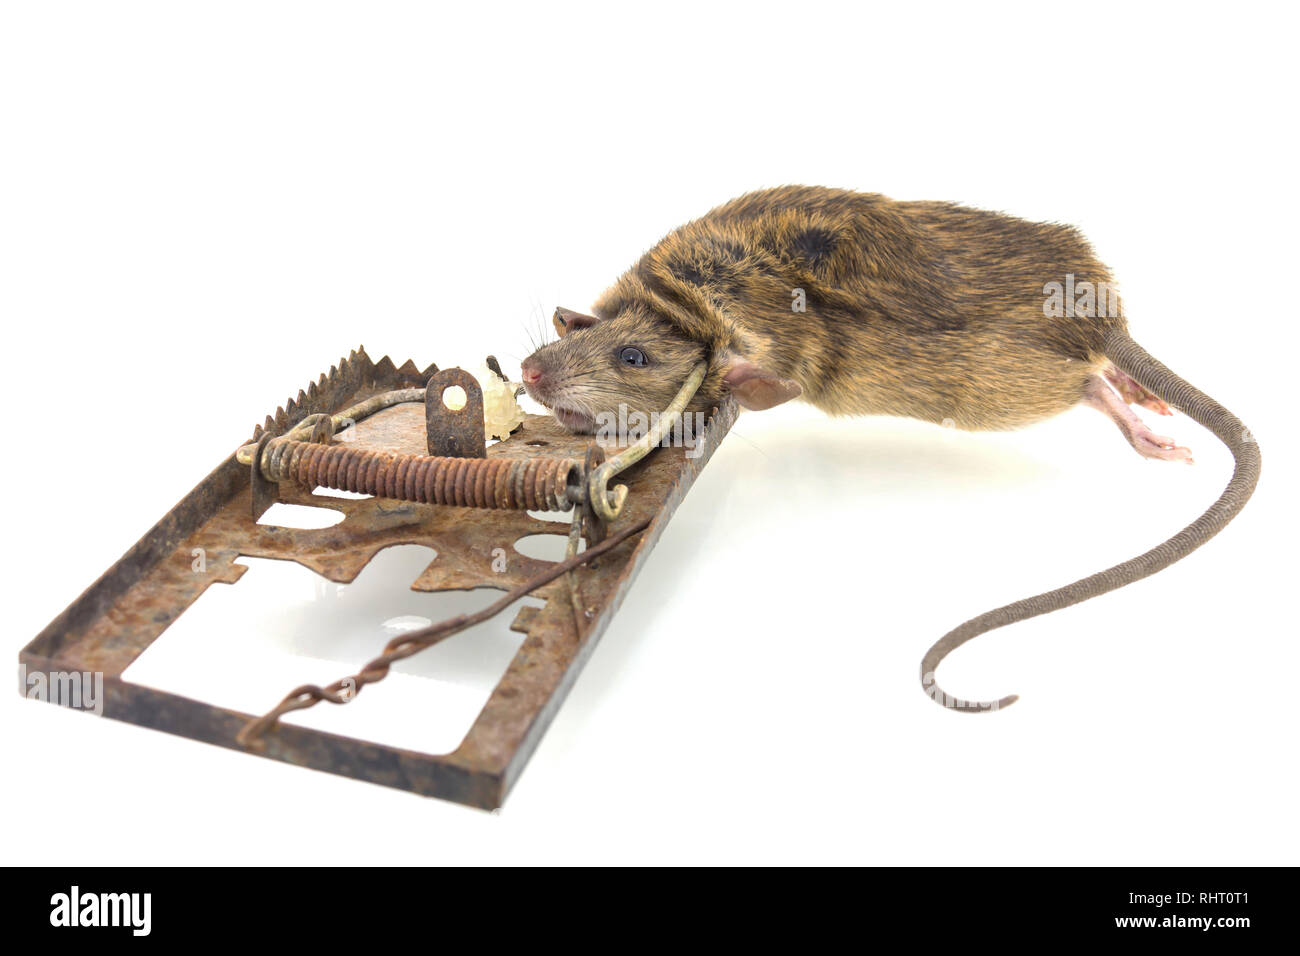 https://c8.alamy.com/comp/RHT0T1/the-mouse-in-a-mousetrap-it-is-isolated-on-a-white-background-RHT0T1.jpg